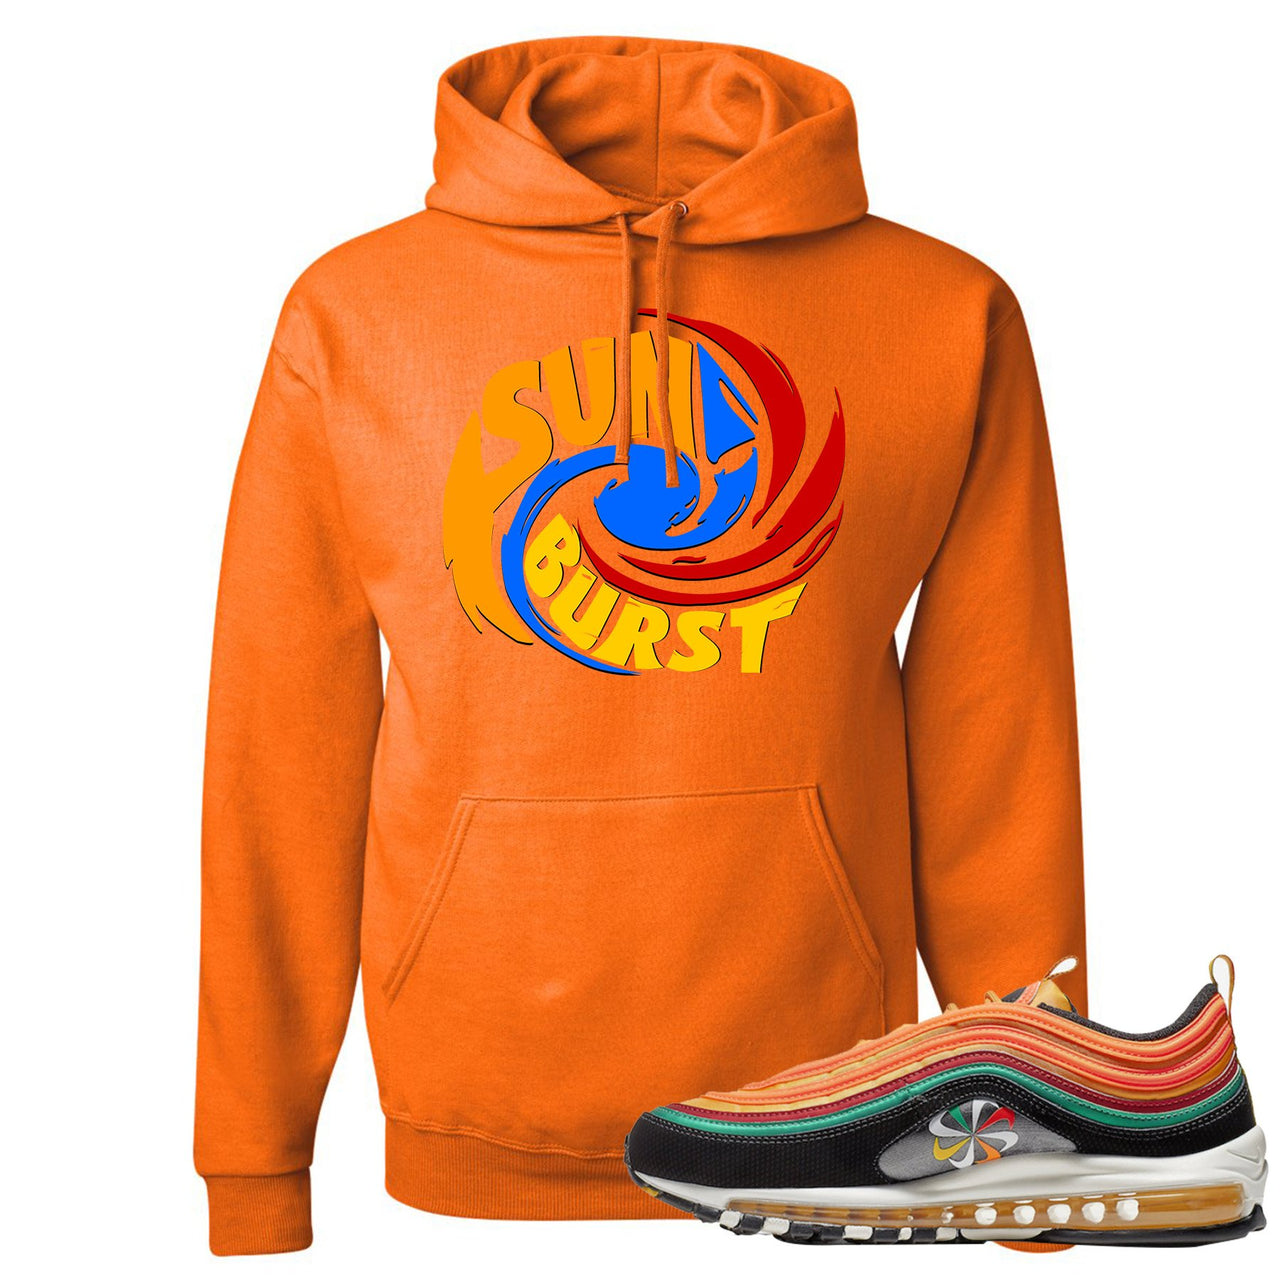 Printed on the front of the Air Max 97 Sunburst safety orange sneaker matching pullover hoodie is the sunburst hurricane logo